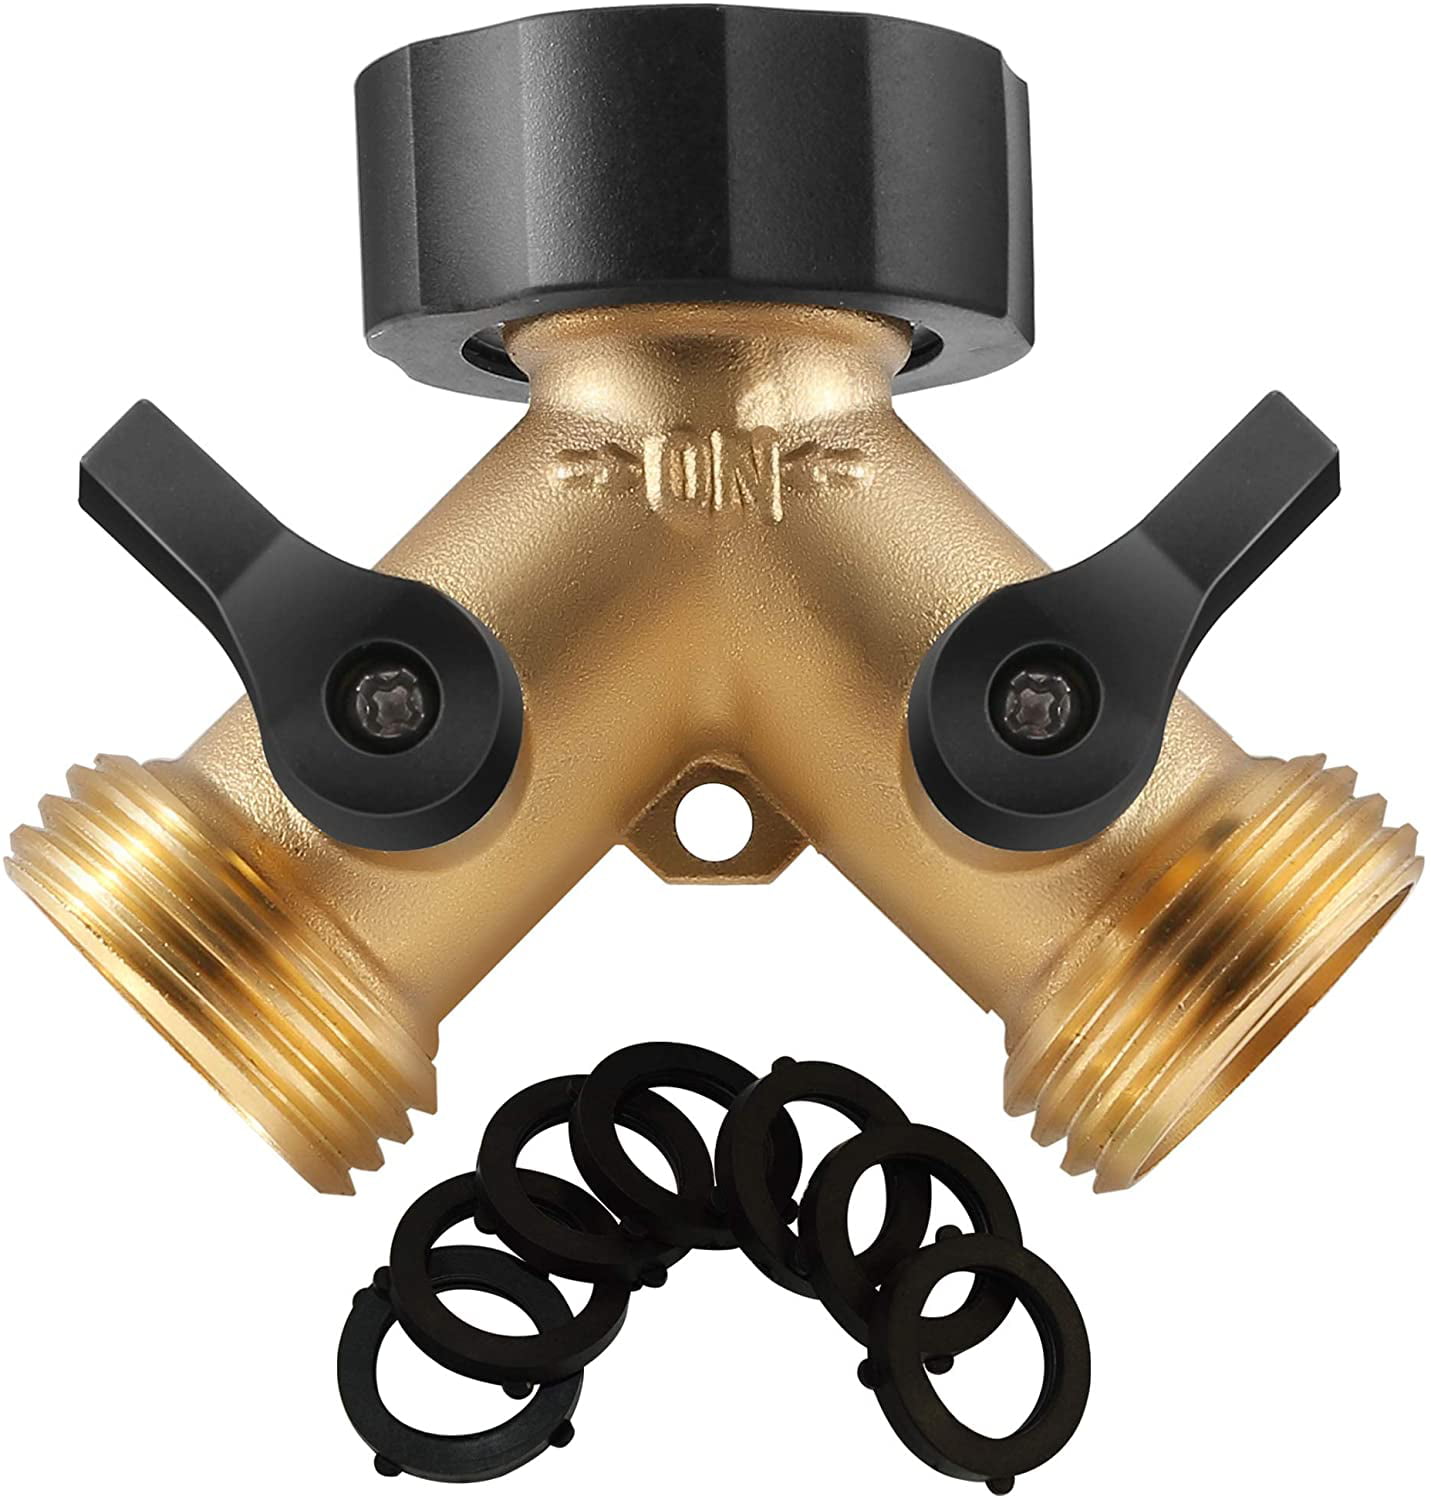 Xiny Tool Brass Garden Hose Splitter 2 Way Solid Brass Hose Y Splitter 2 Valves with 2 Extra Rubber Washers 4